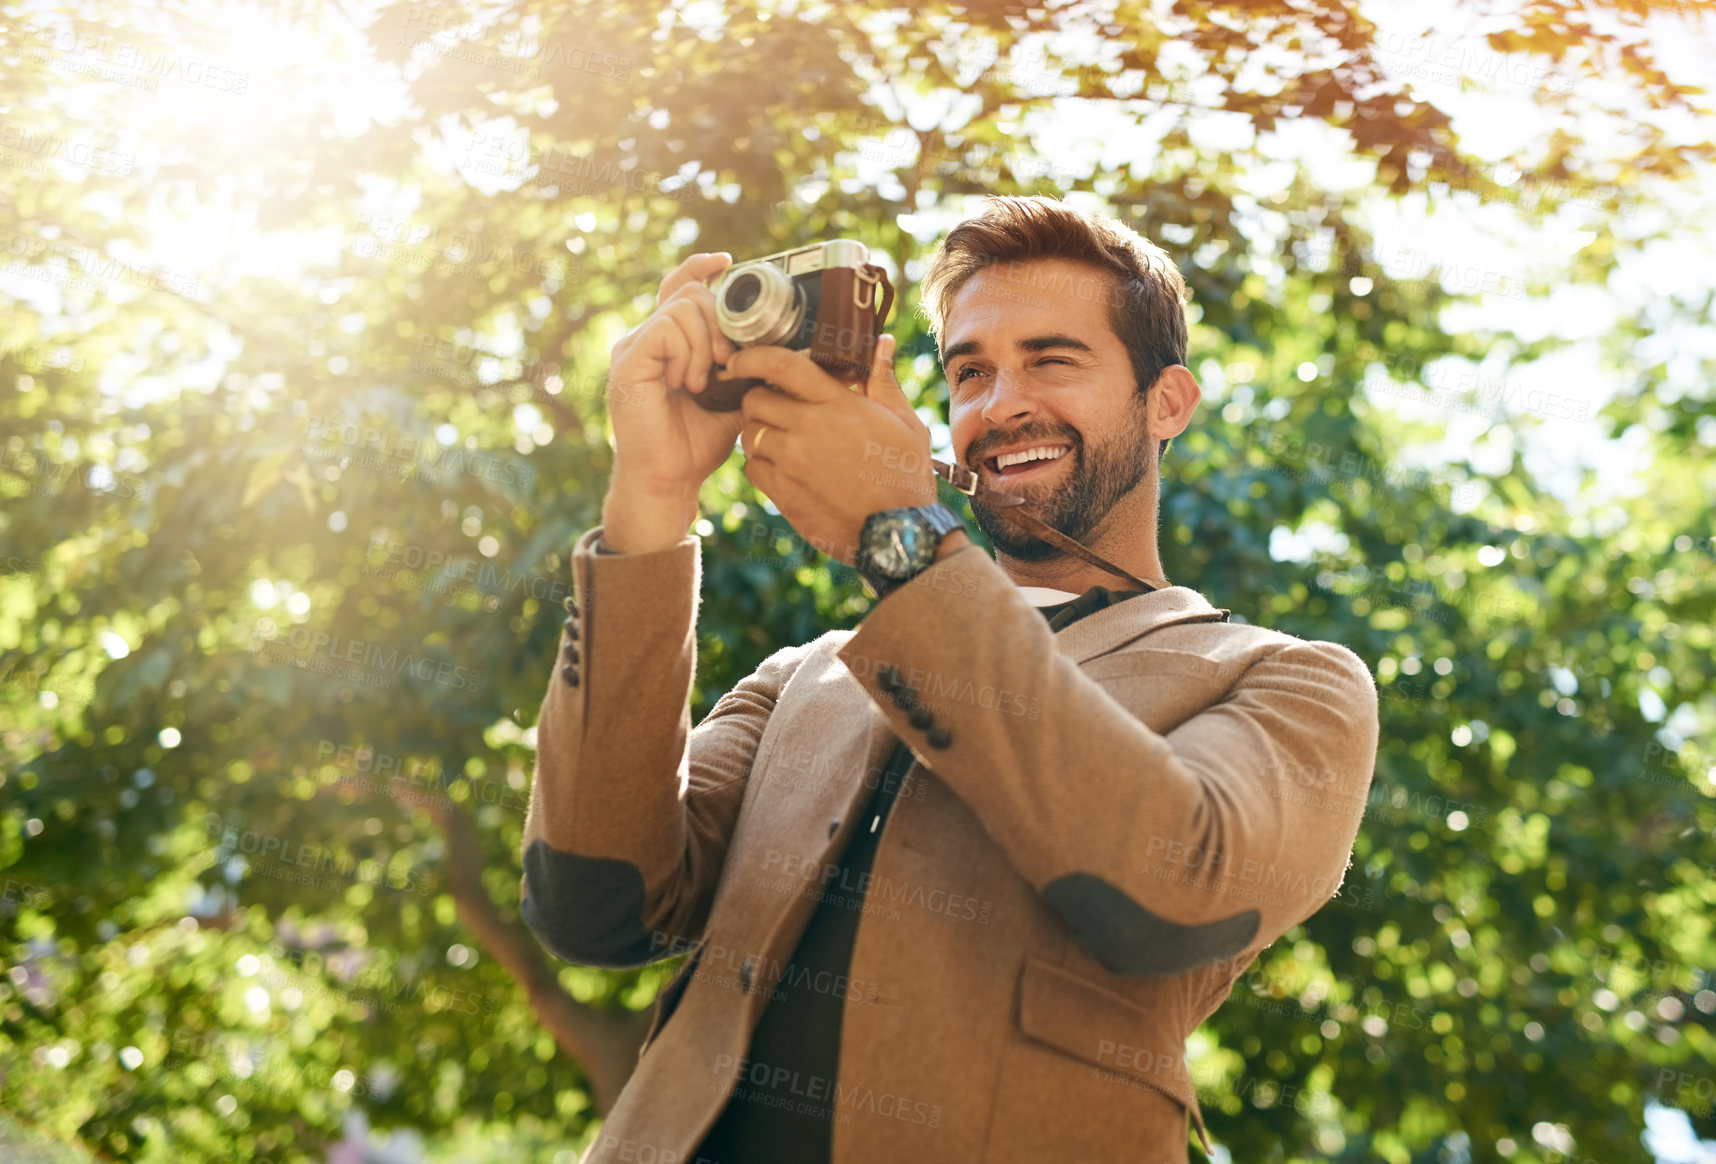 Buy stock photo Cropped shot of a handsome young man taking photographs during his morning commute